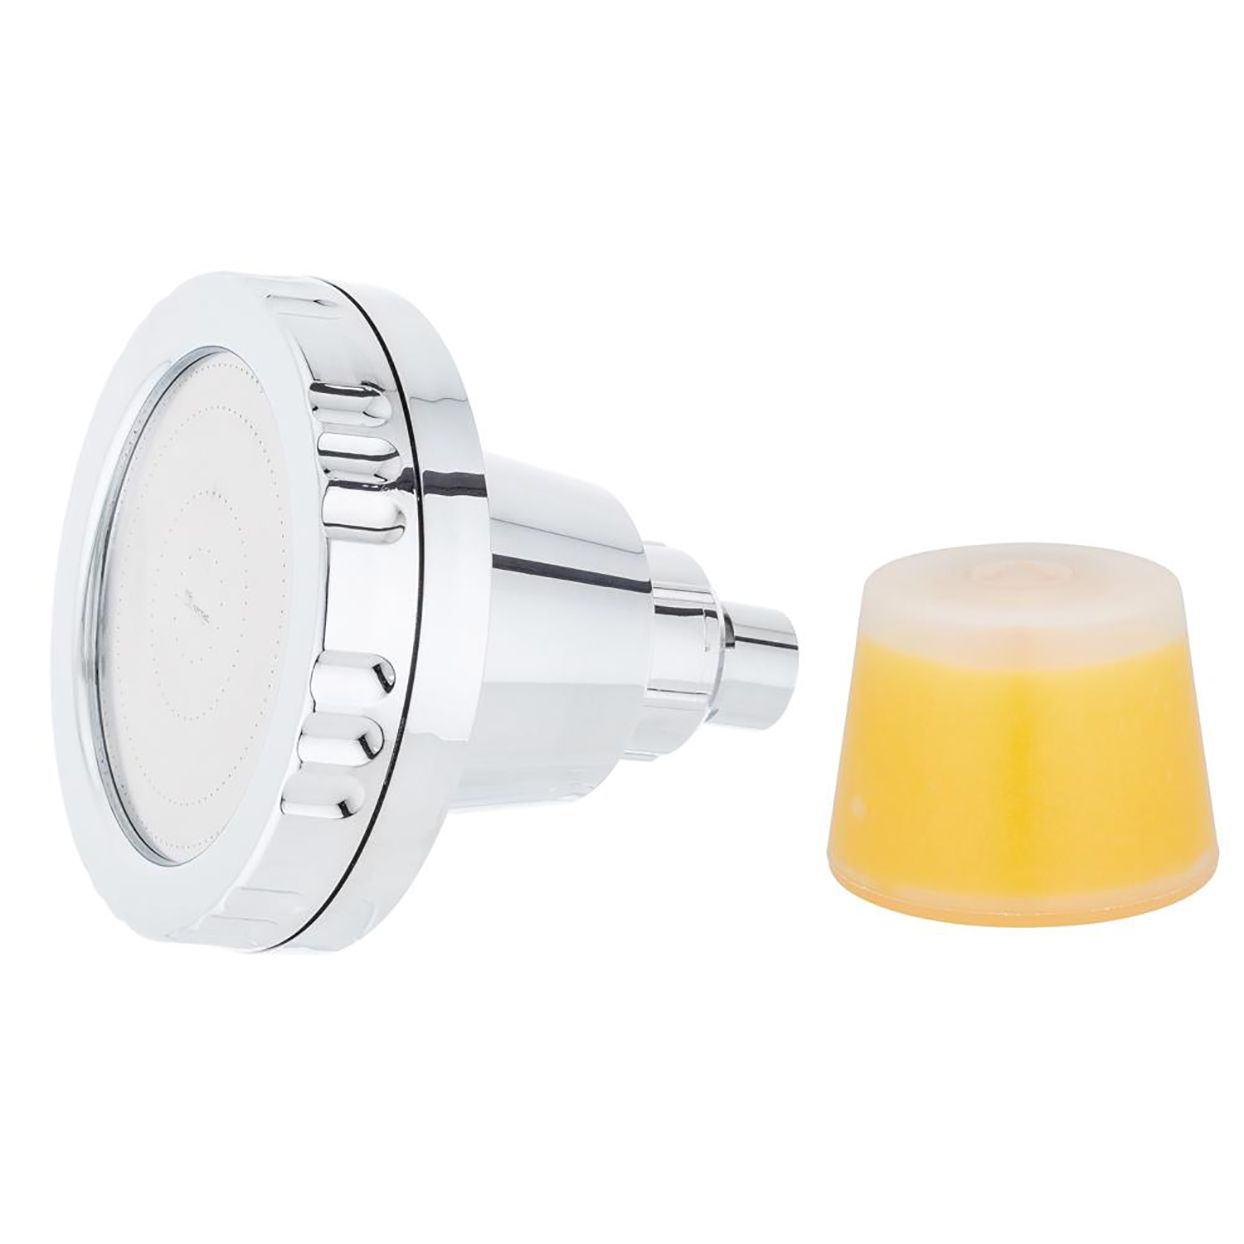 showerhead with yellow vitamin c filter